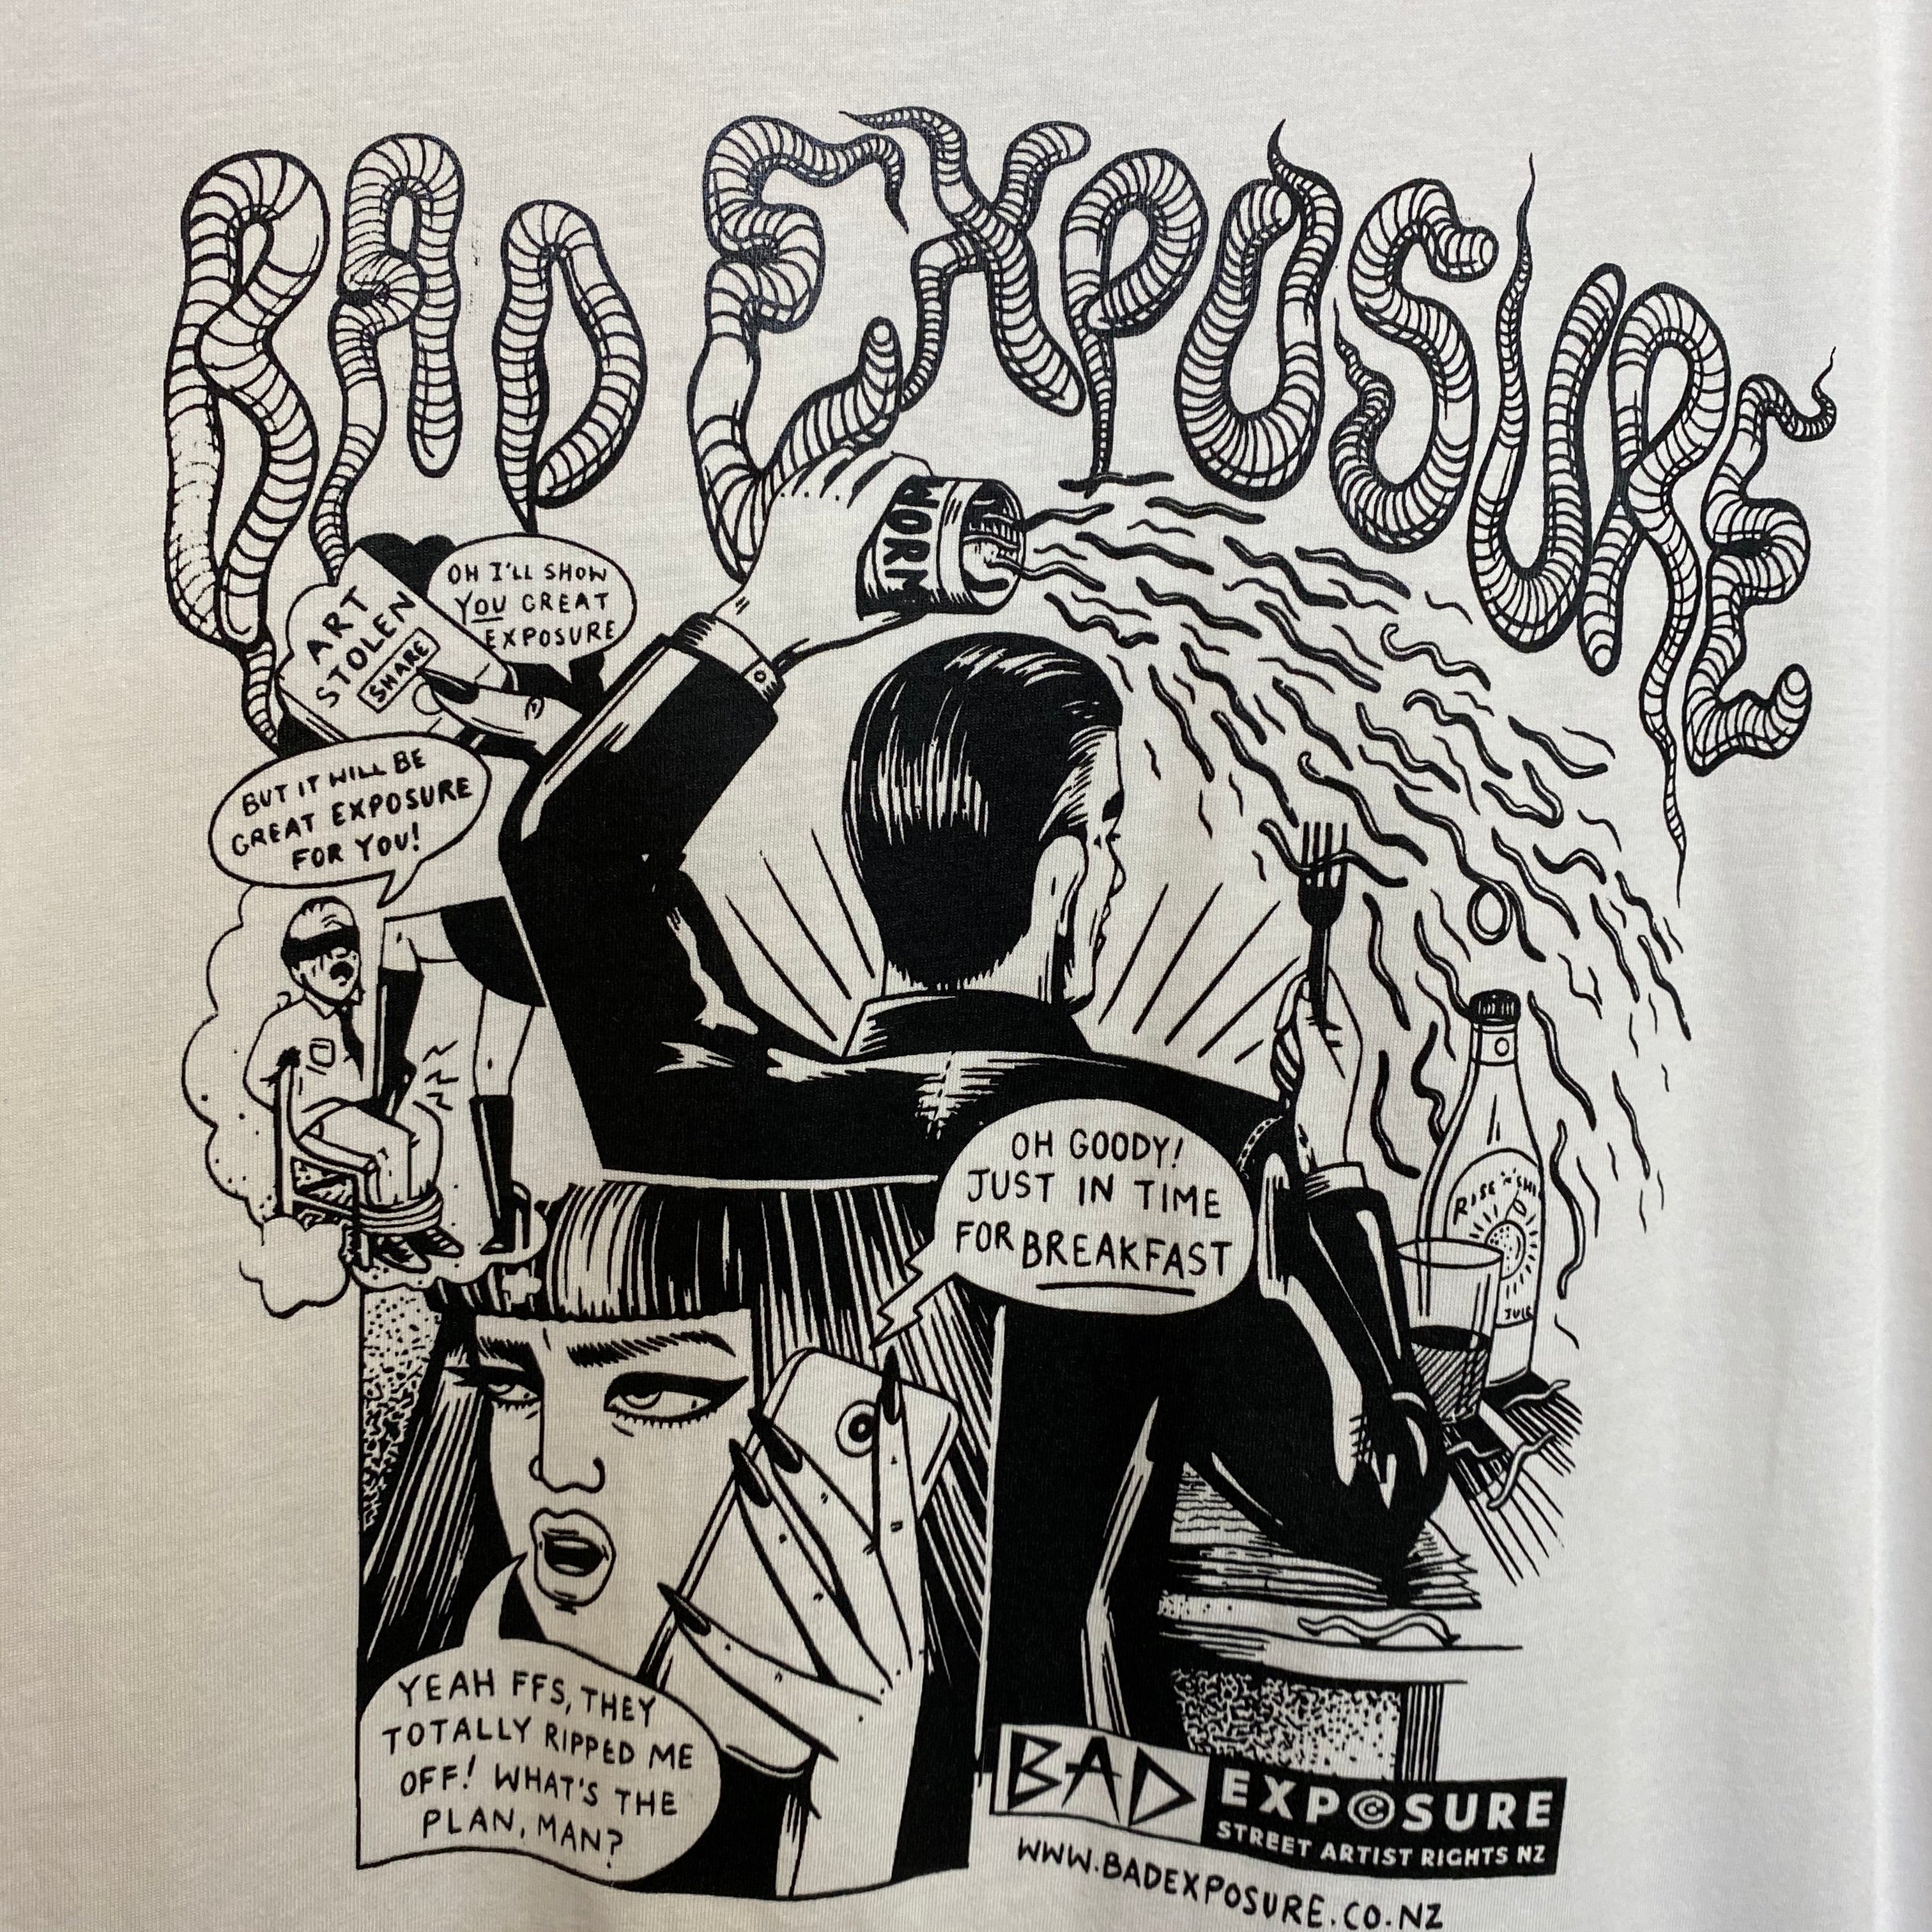 “EXPOSURE DOESN’T PAY THE BILLS” - EVERY ARTIST EVER Xoe Hall designed t-shirts